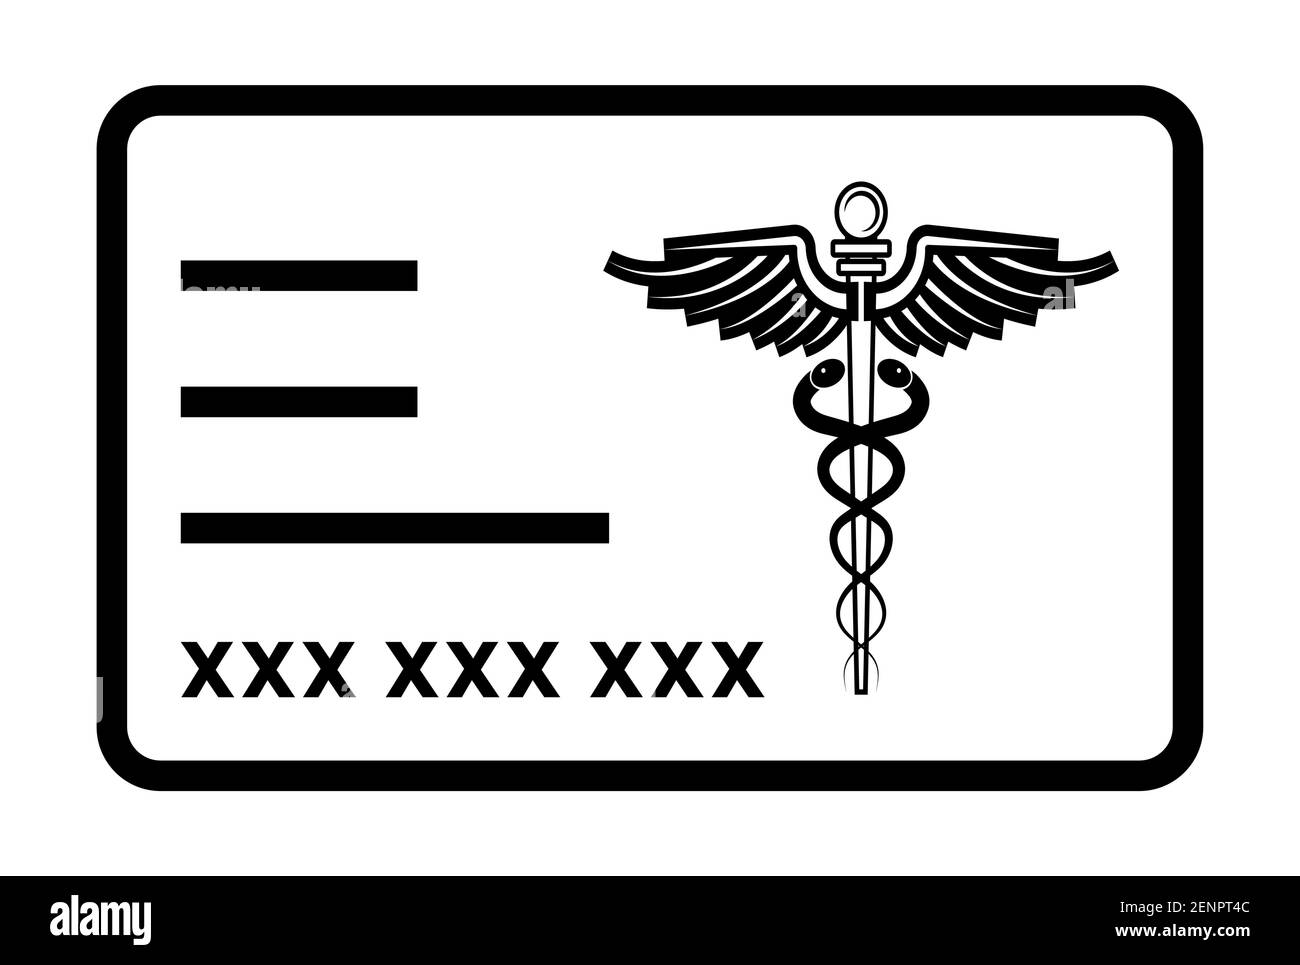 Medical health insurance card line art icon for apps or website Stock Vector